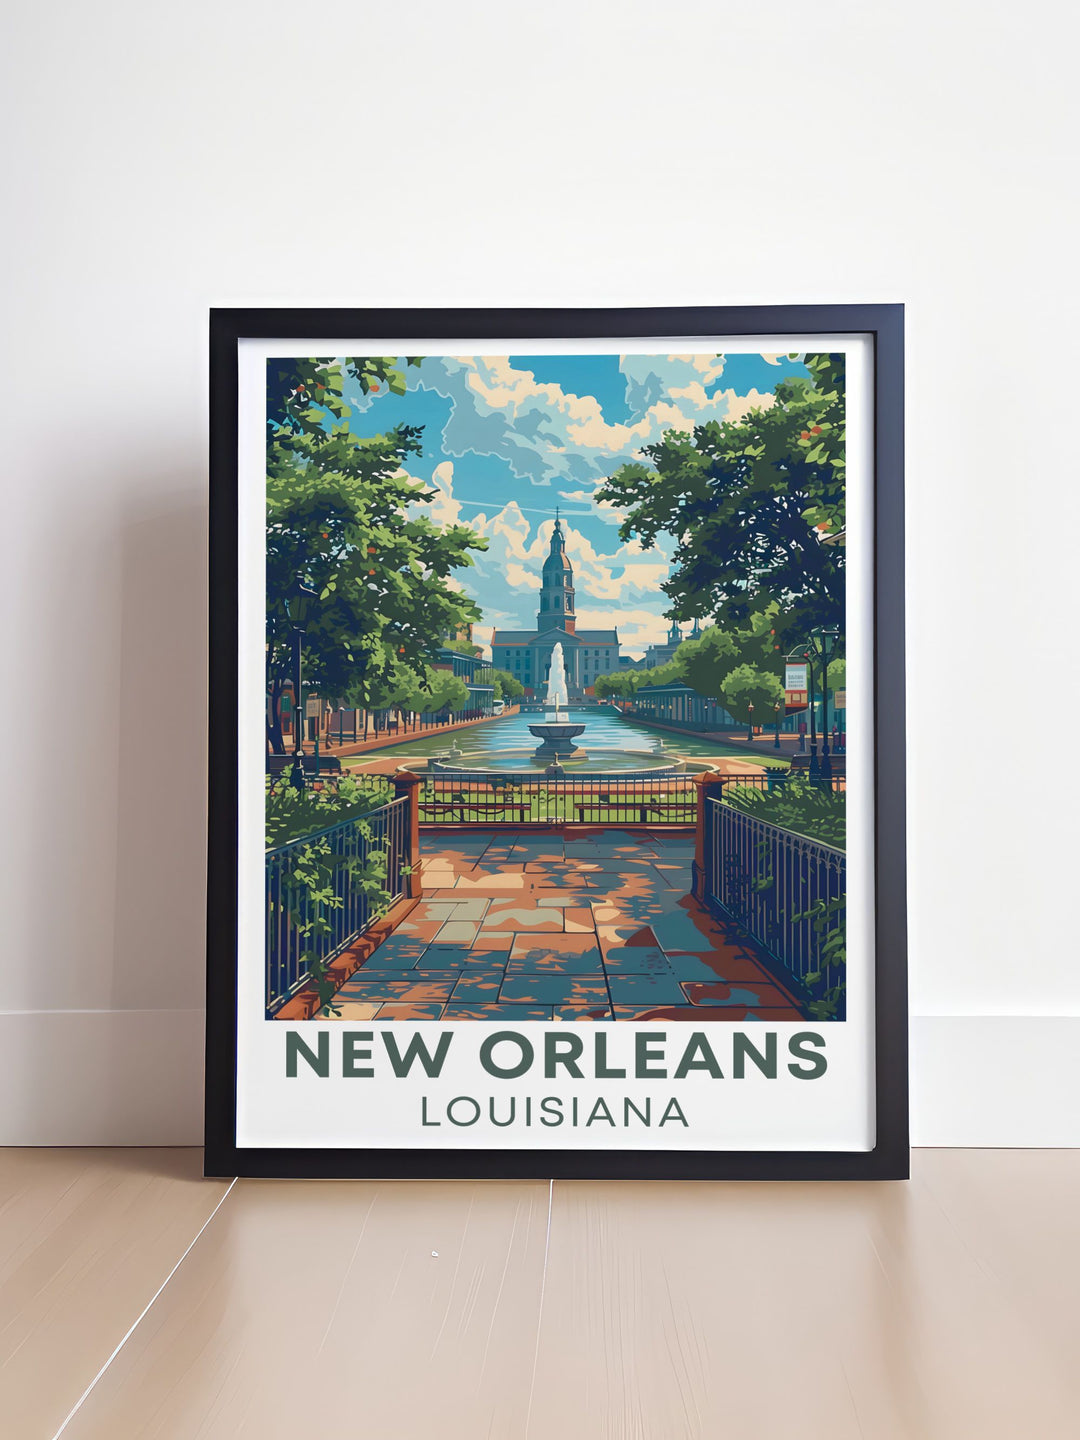 Captivating Jackson Square vintage print showcasing the iconic landmark of New Orleans perfect for those who love Louisiana travel art and want to bring a touch of history and charm to their decor